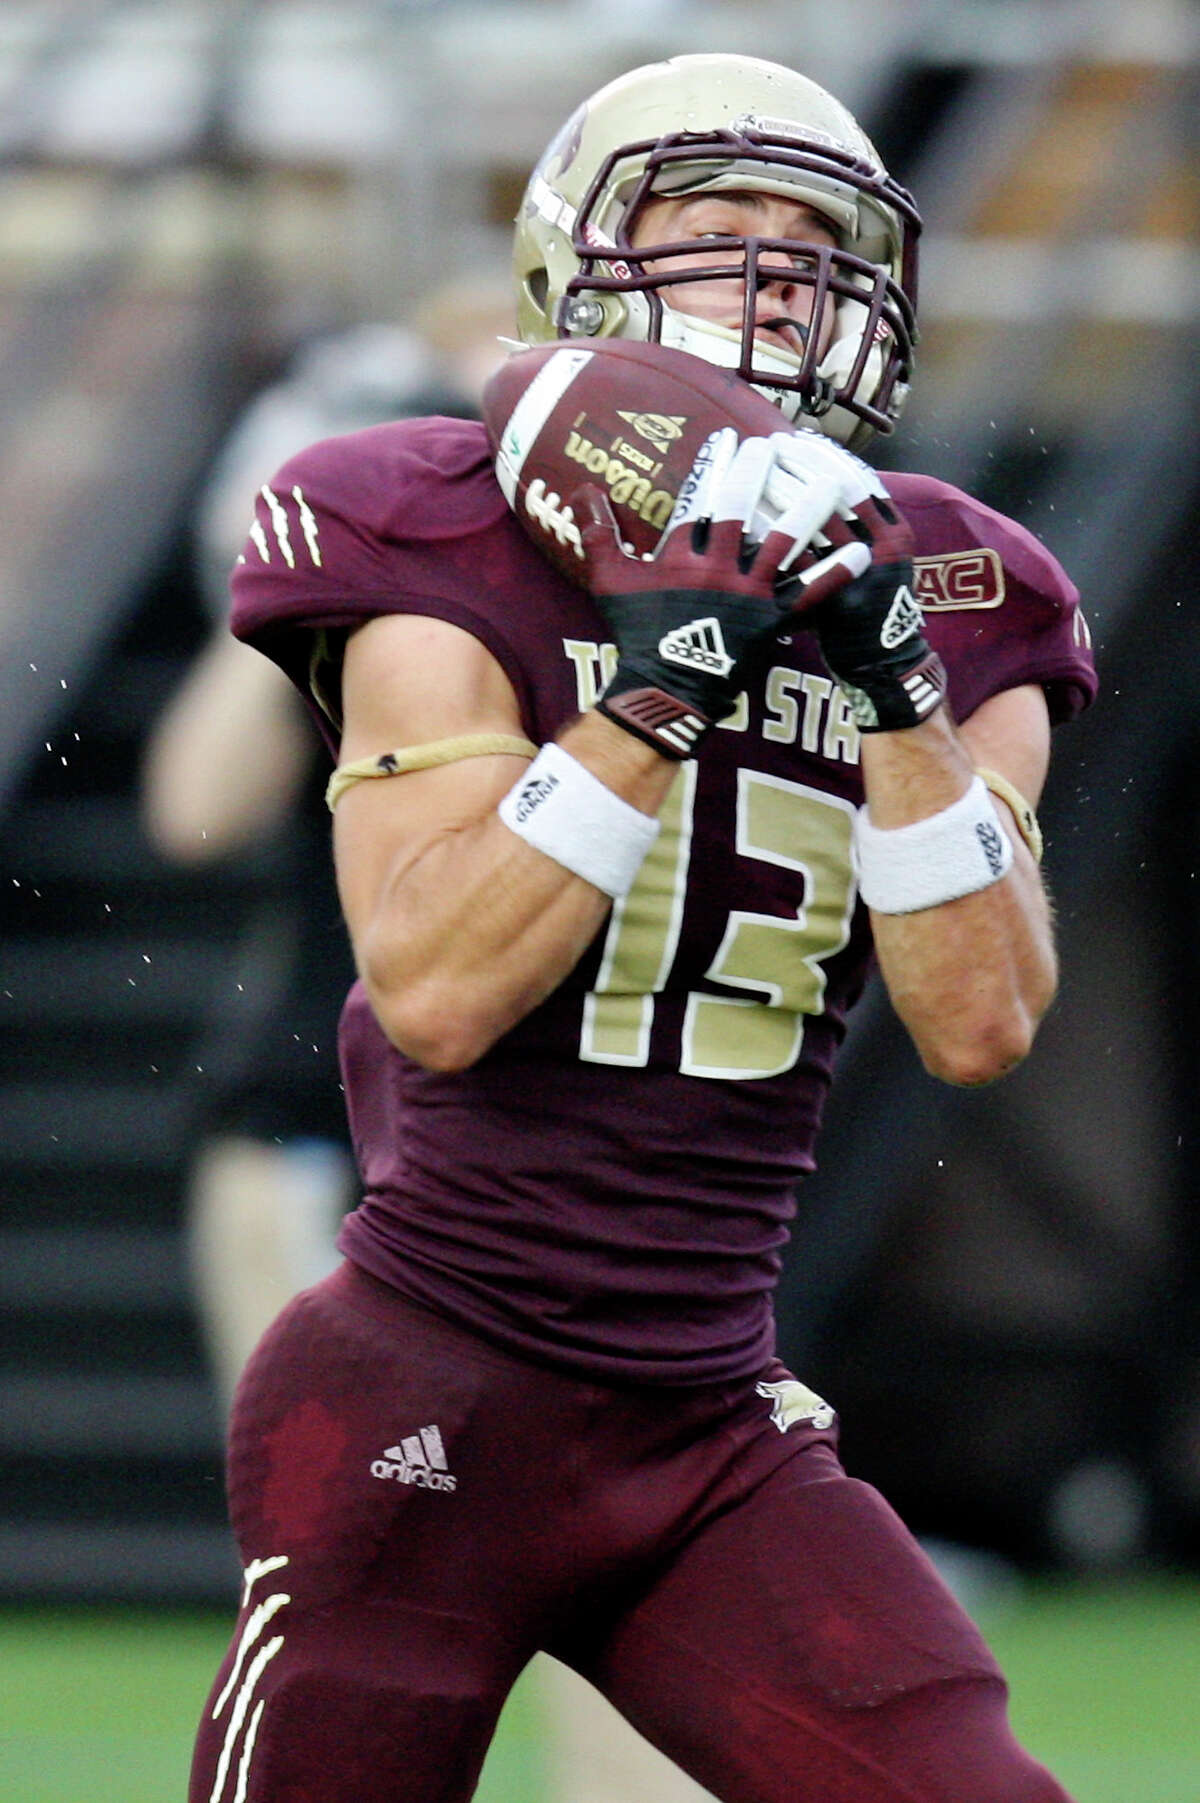 Texas State Bobcats' Andy Erickson catches a pass during first half action against the Idaho Vandals Saturday Oct. 13, 2012 at Bobcat Stadium in San Marcos, Tx. Erickson scored a touchdown on the play.